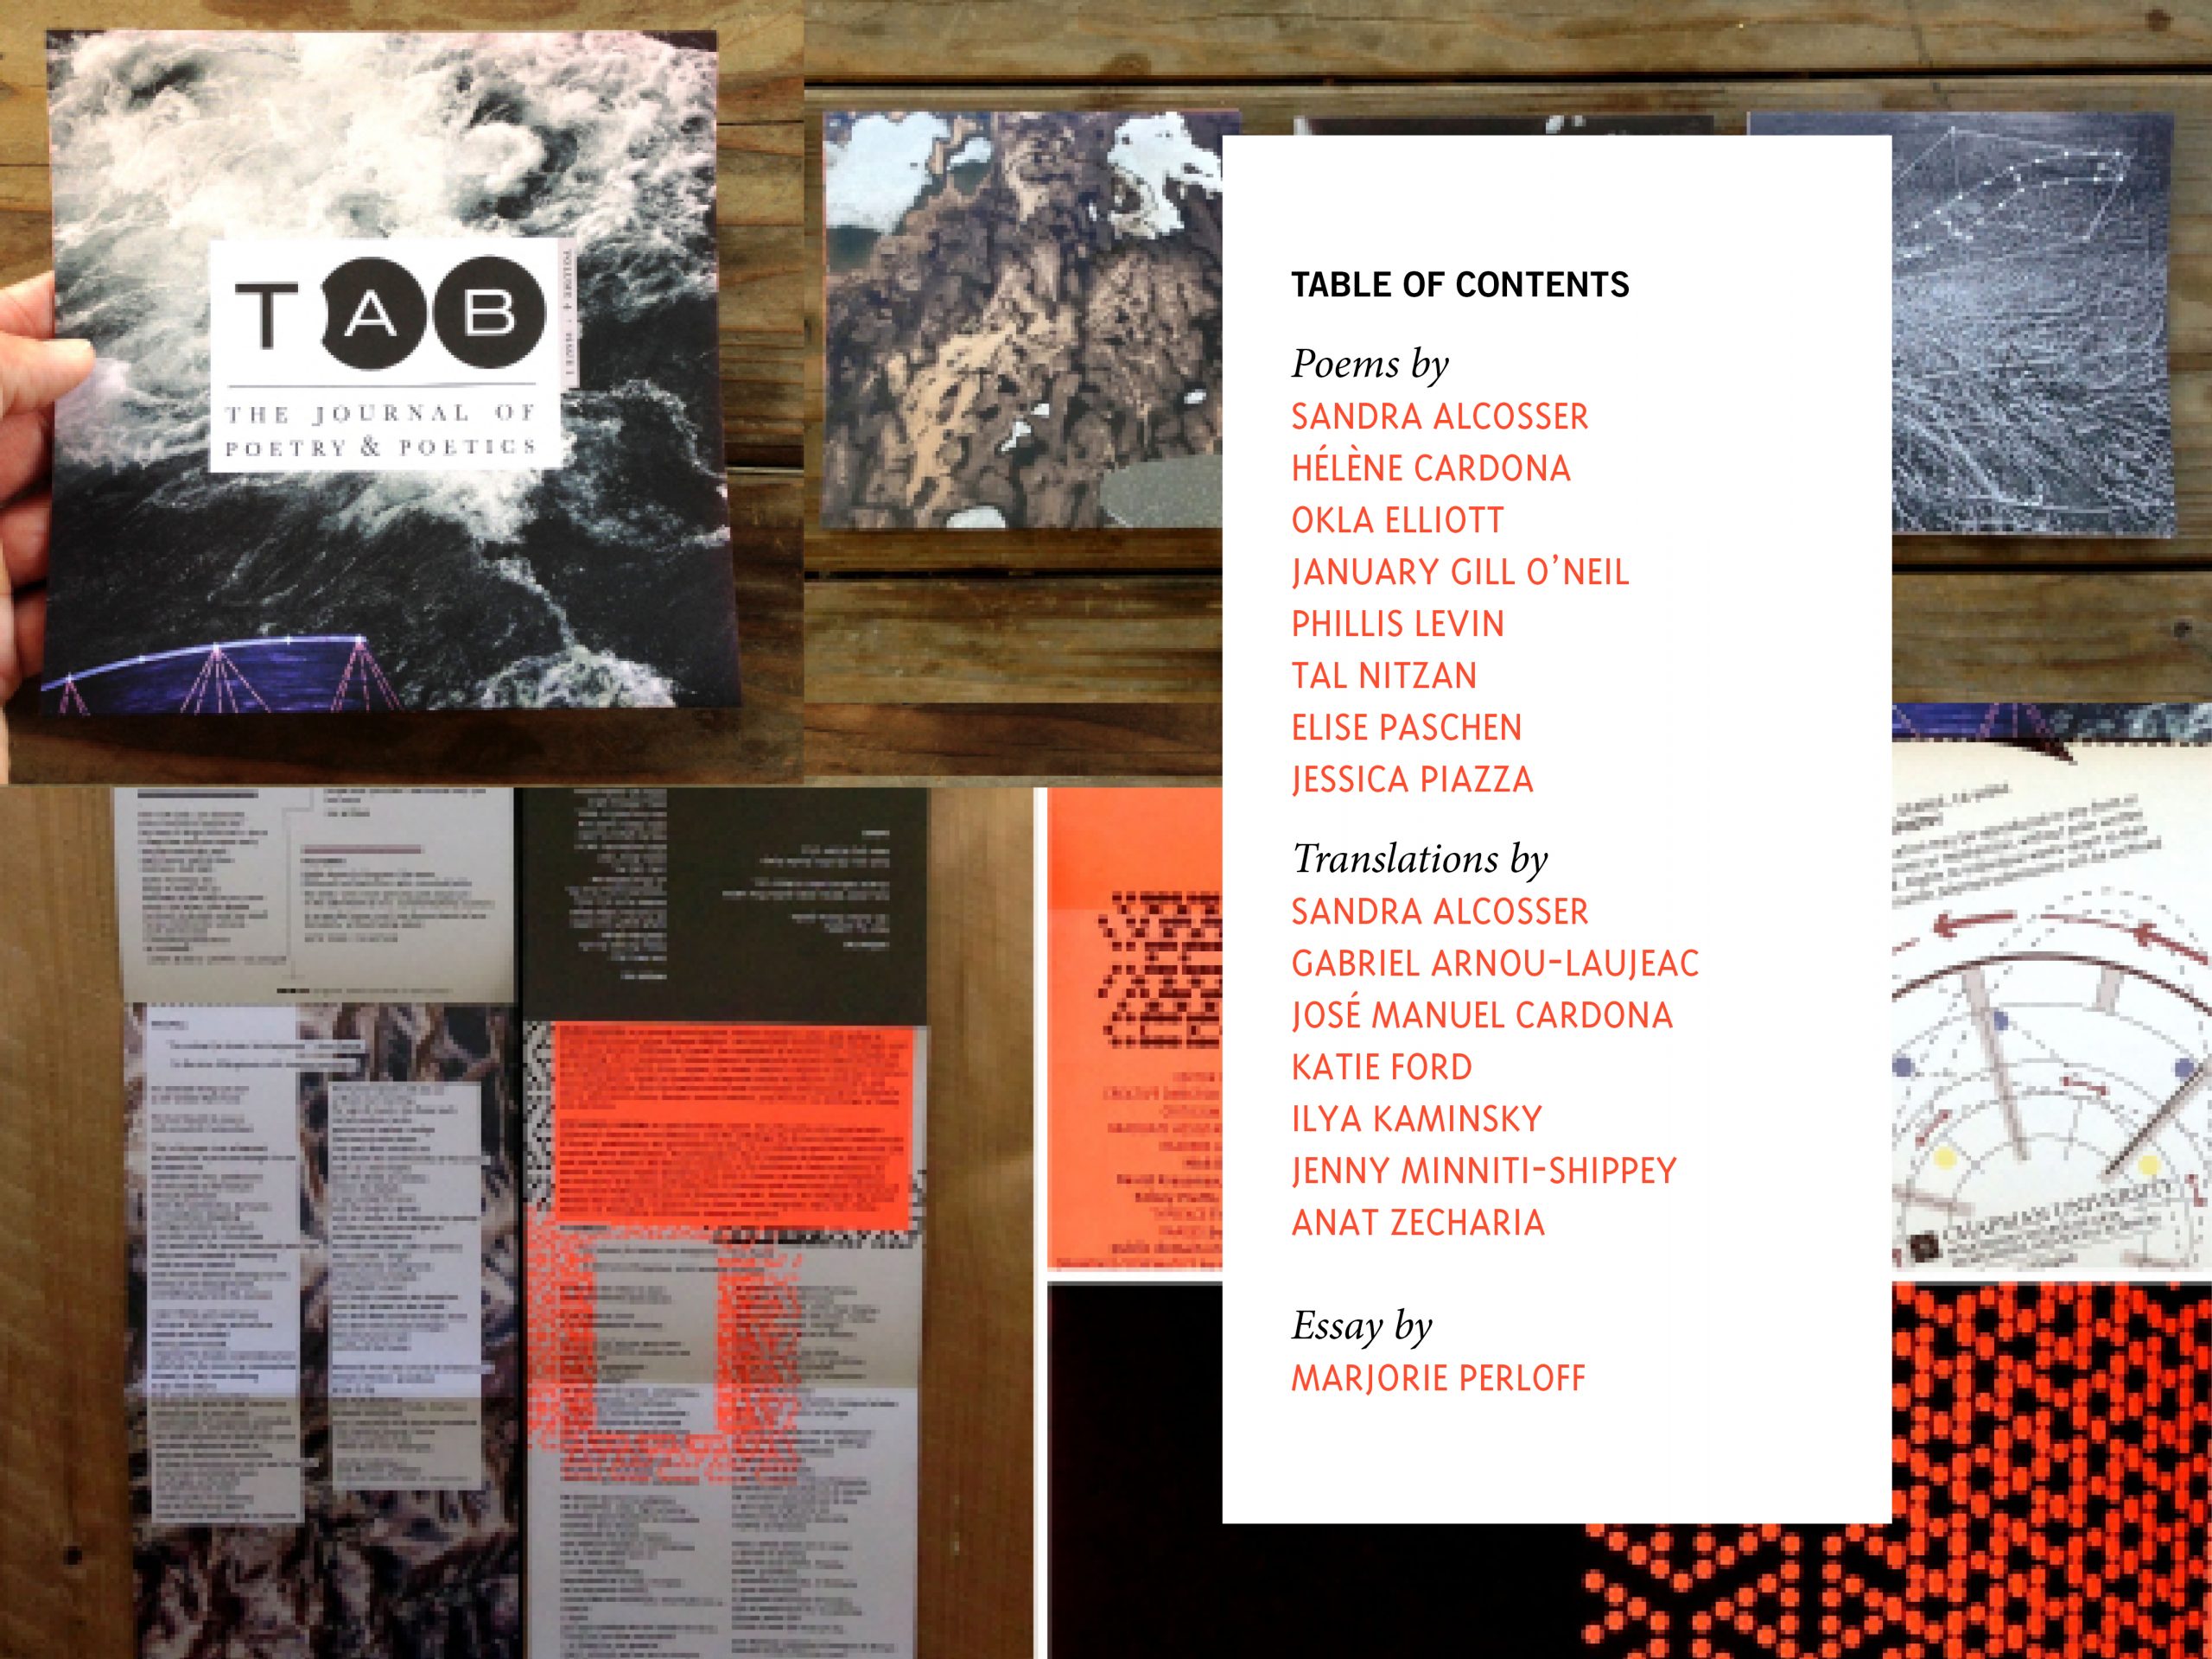 collage of the issue that starts out square and unfolds into four panels and he table of contents lists 16 contributors across poems, translations, and an essay